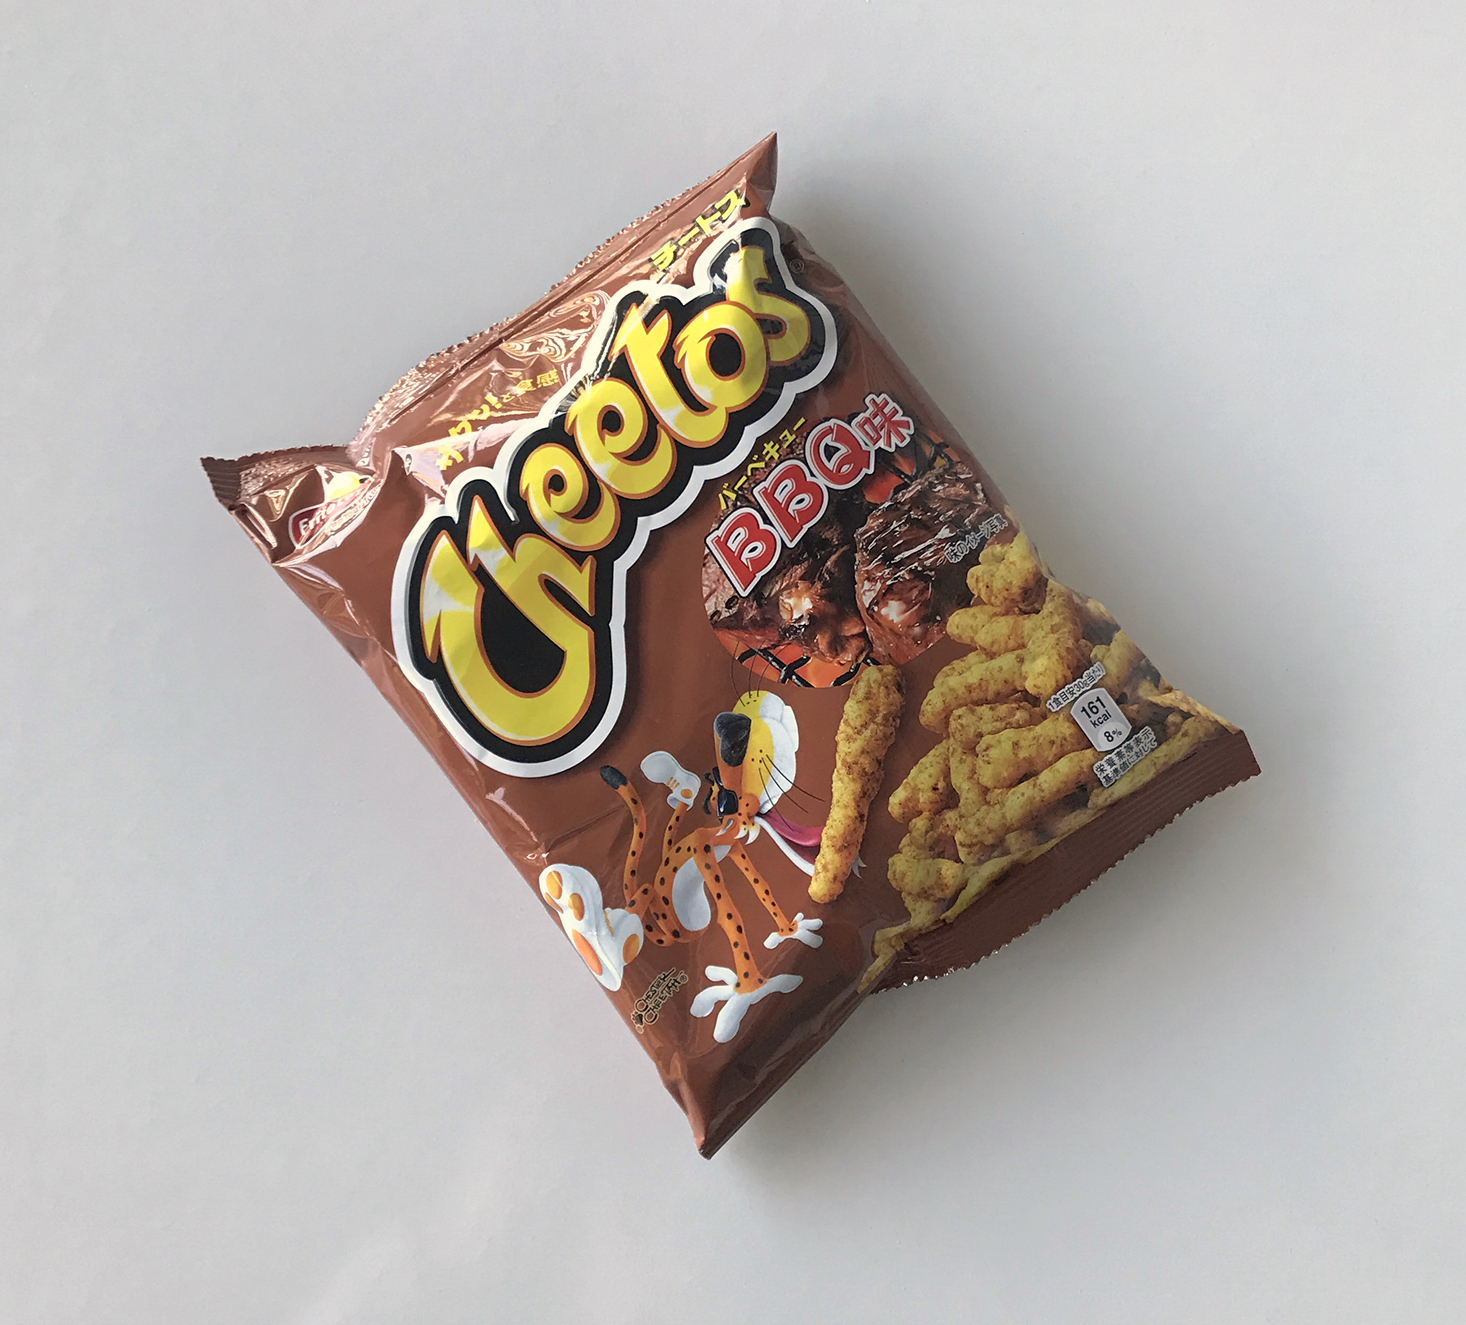 Japan-Crate-February-2017-BBQ-Cheetos